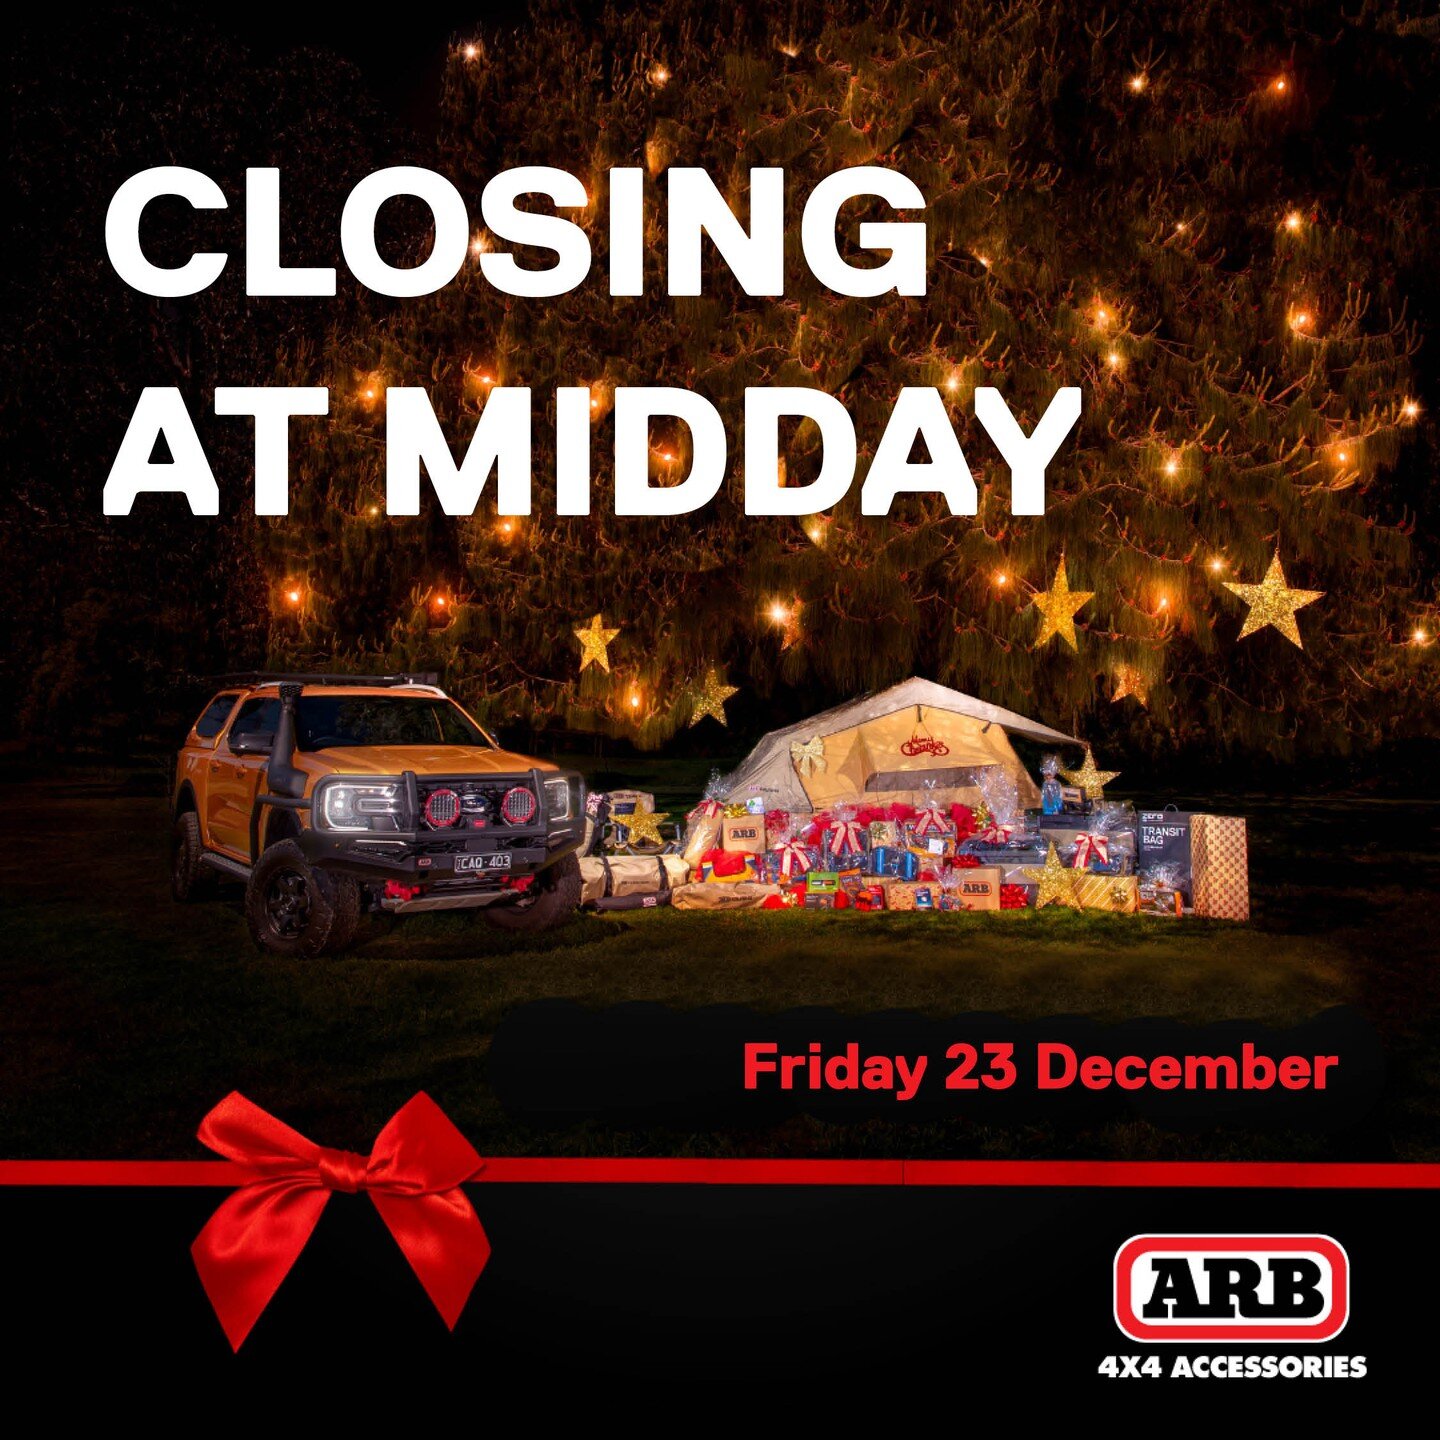 We are closing at midday, Friday 23 December for a few snags on the BBQ with the team. 

We will be open Christmas Eve from 9 until 12 to fill your stockings with the last minute gifts, or to grab that present that will win Christmas for you.